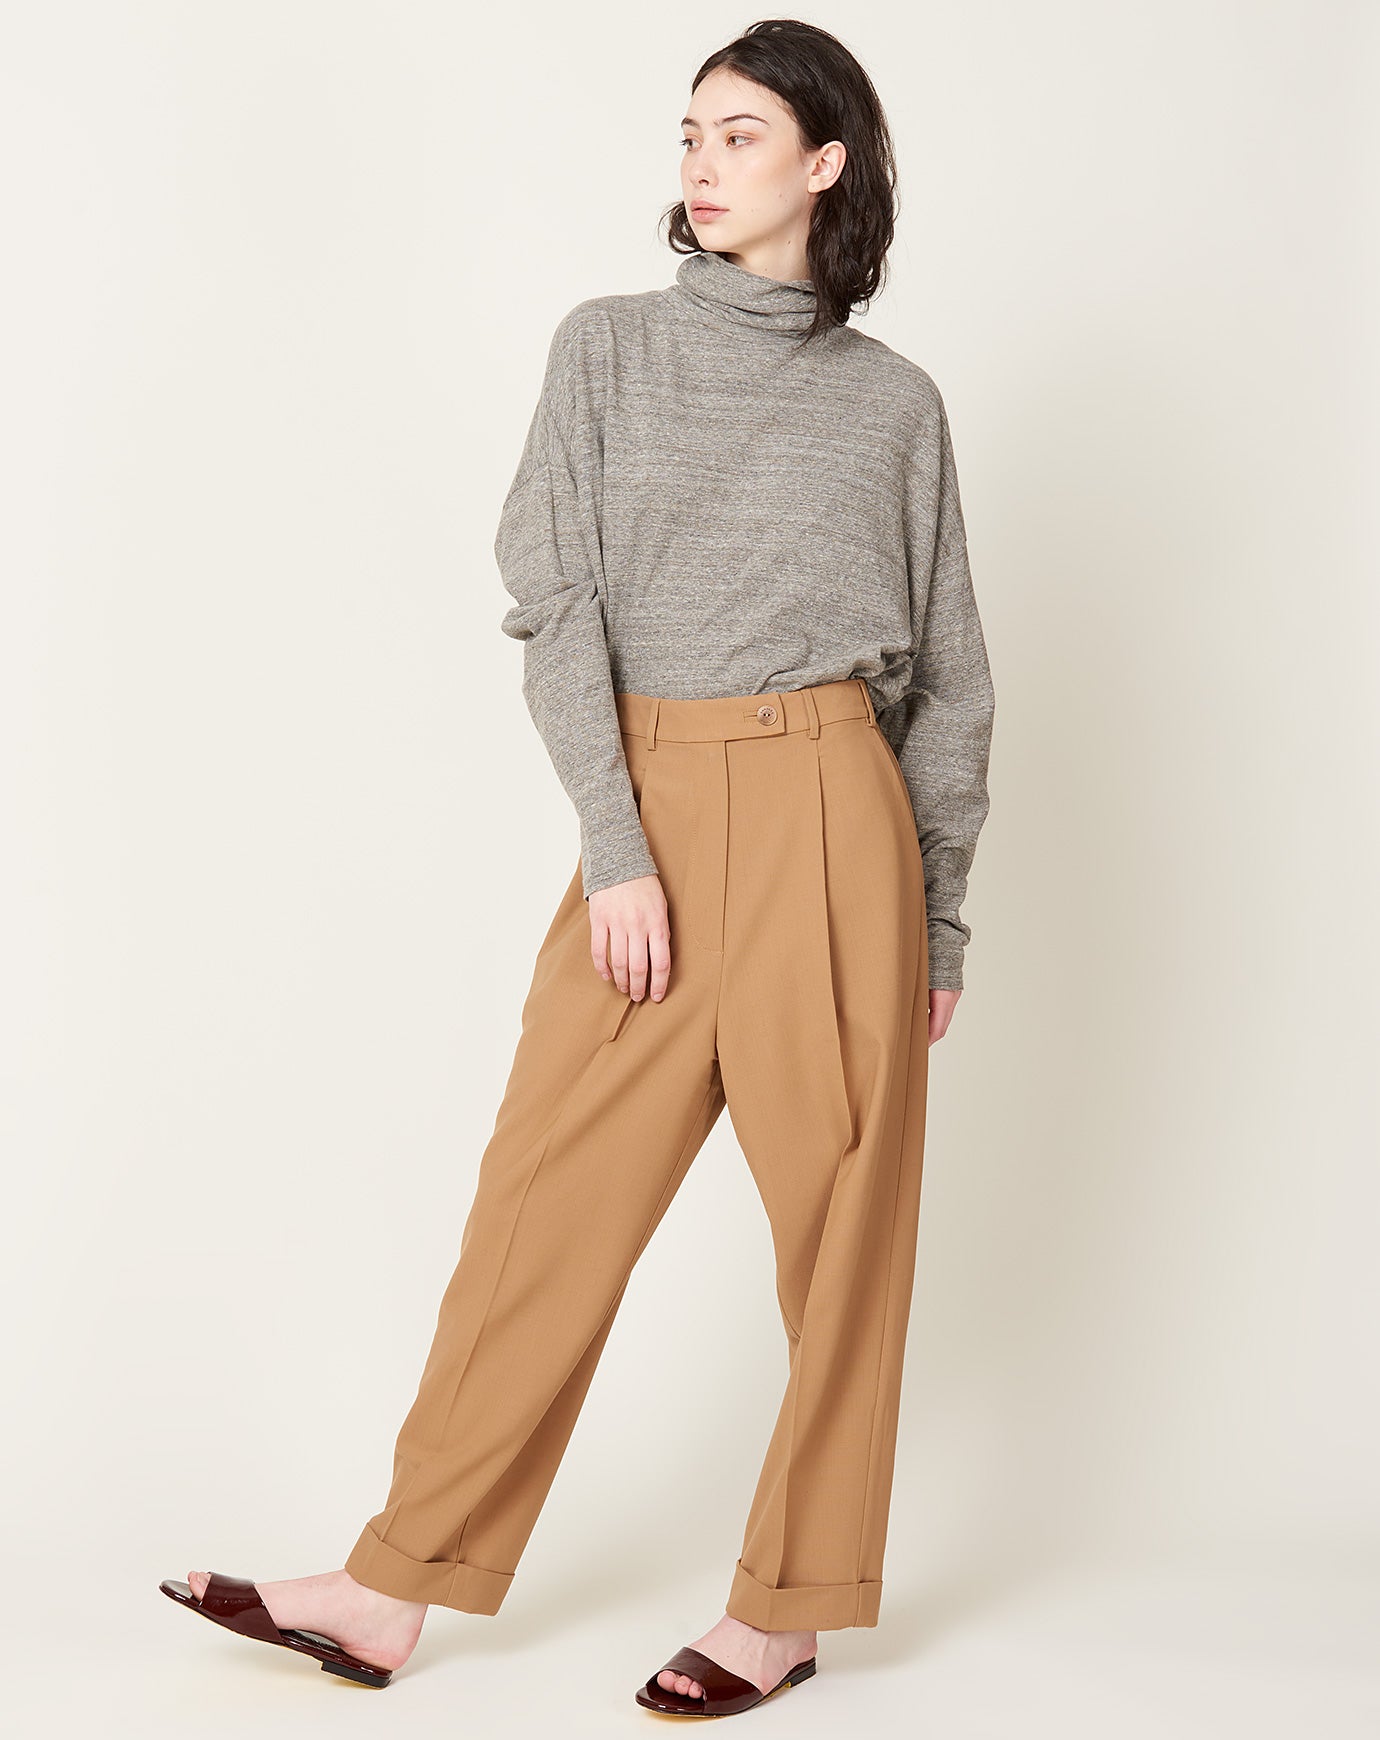 Cordera Tailoring Masculine Pants in Camel